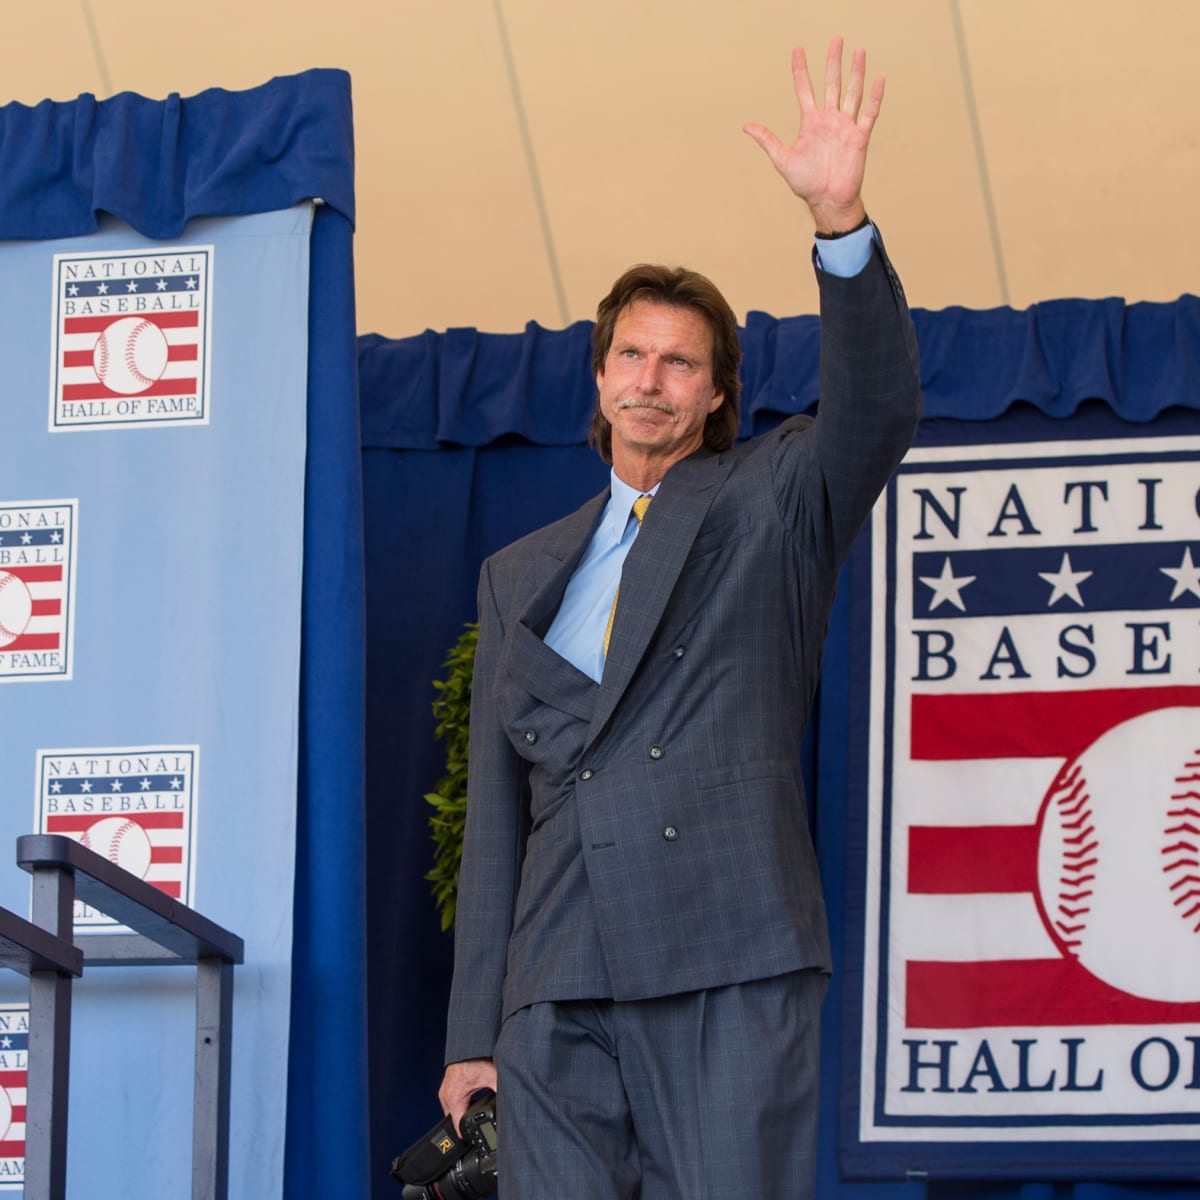 Hall of Fame candidate breakdown: Randy Johnson 